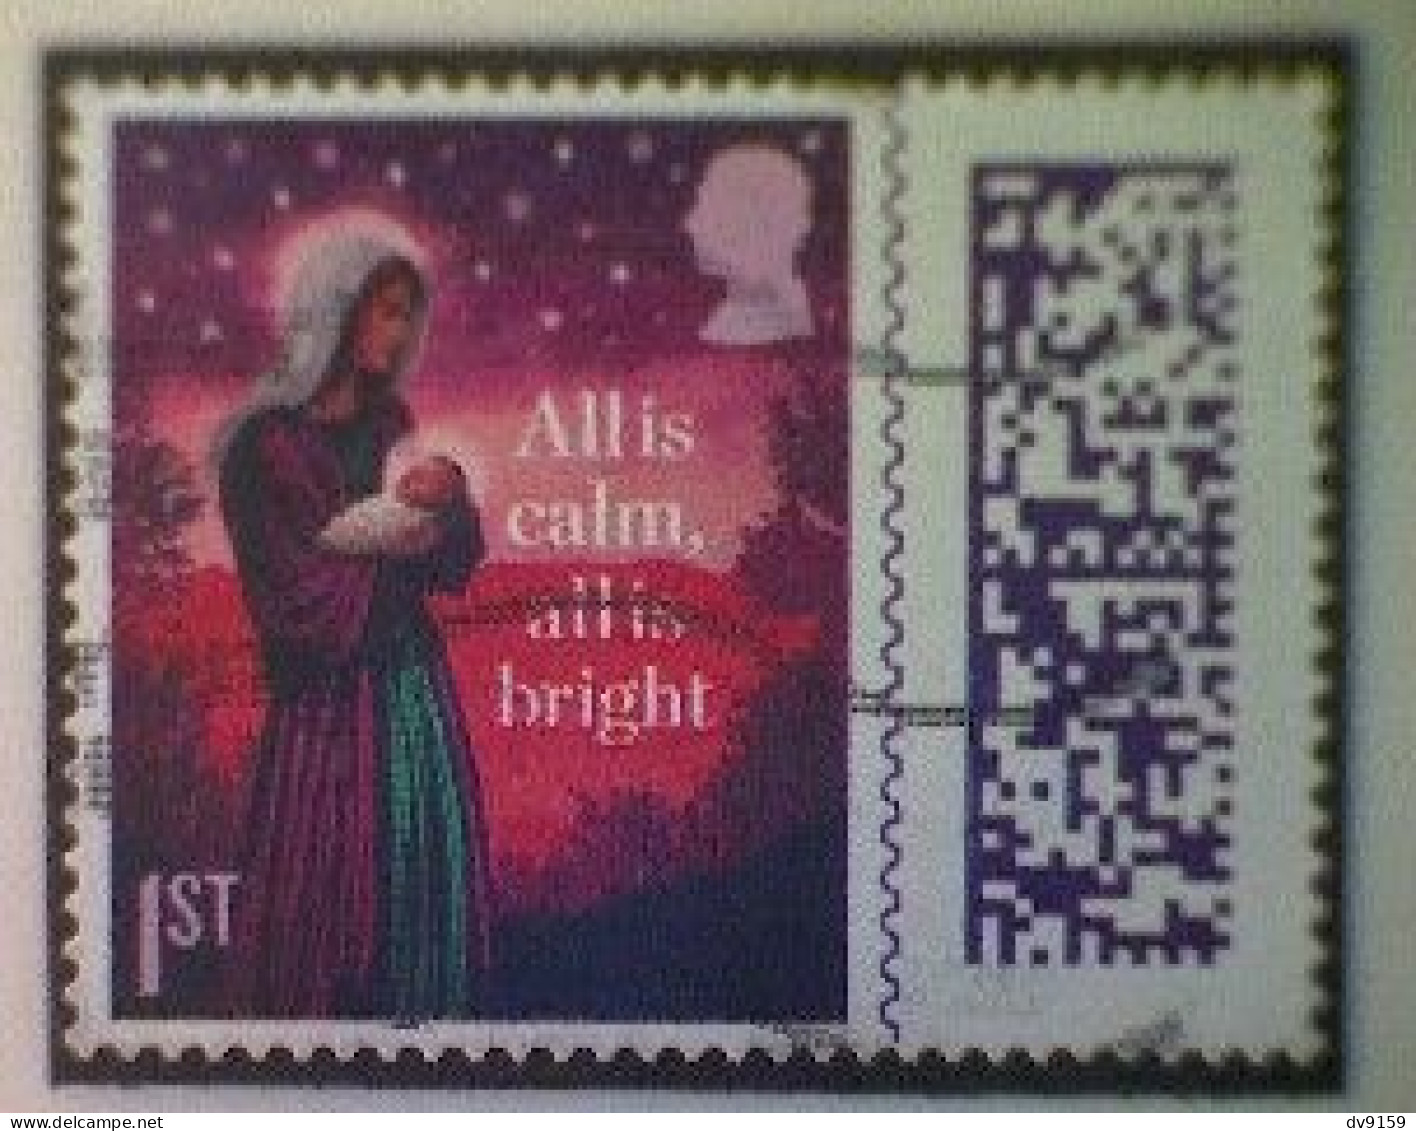 Great Britain, Scott #4444, Used(o), 2023, Traditional Christmas, 1st, Multicolored - Gebraucht